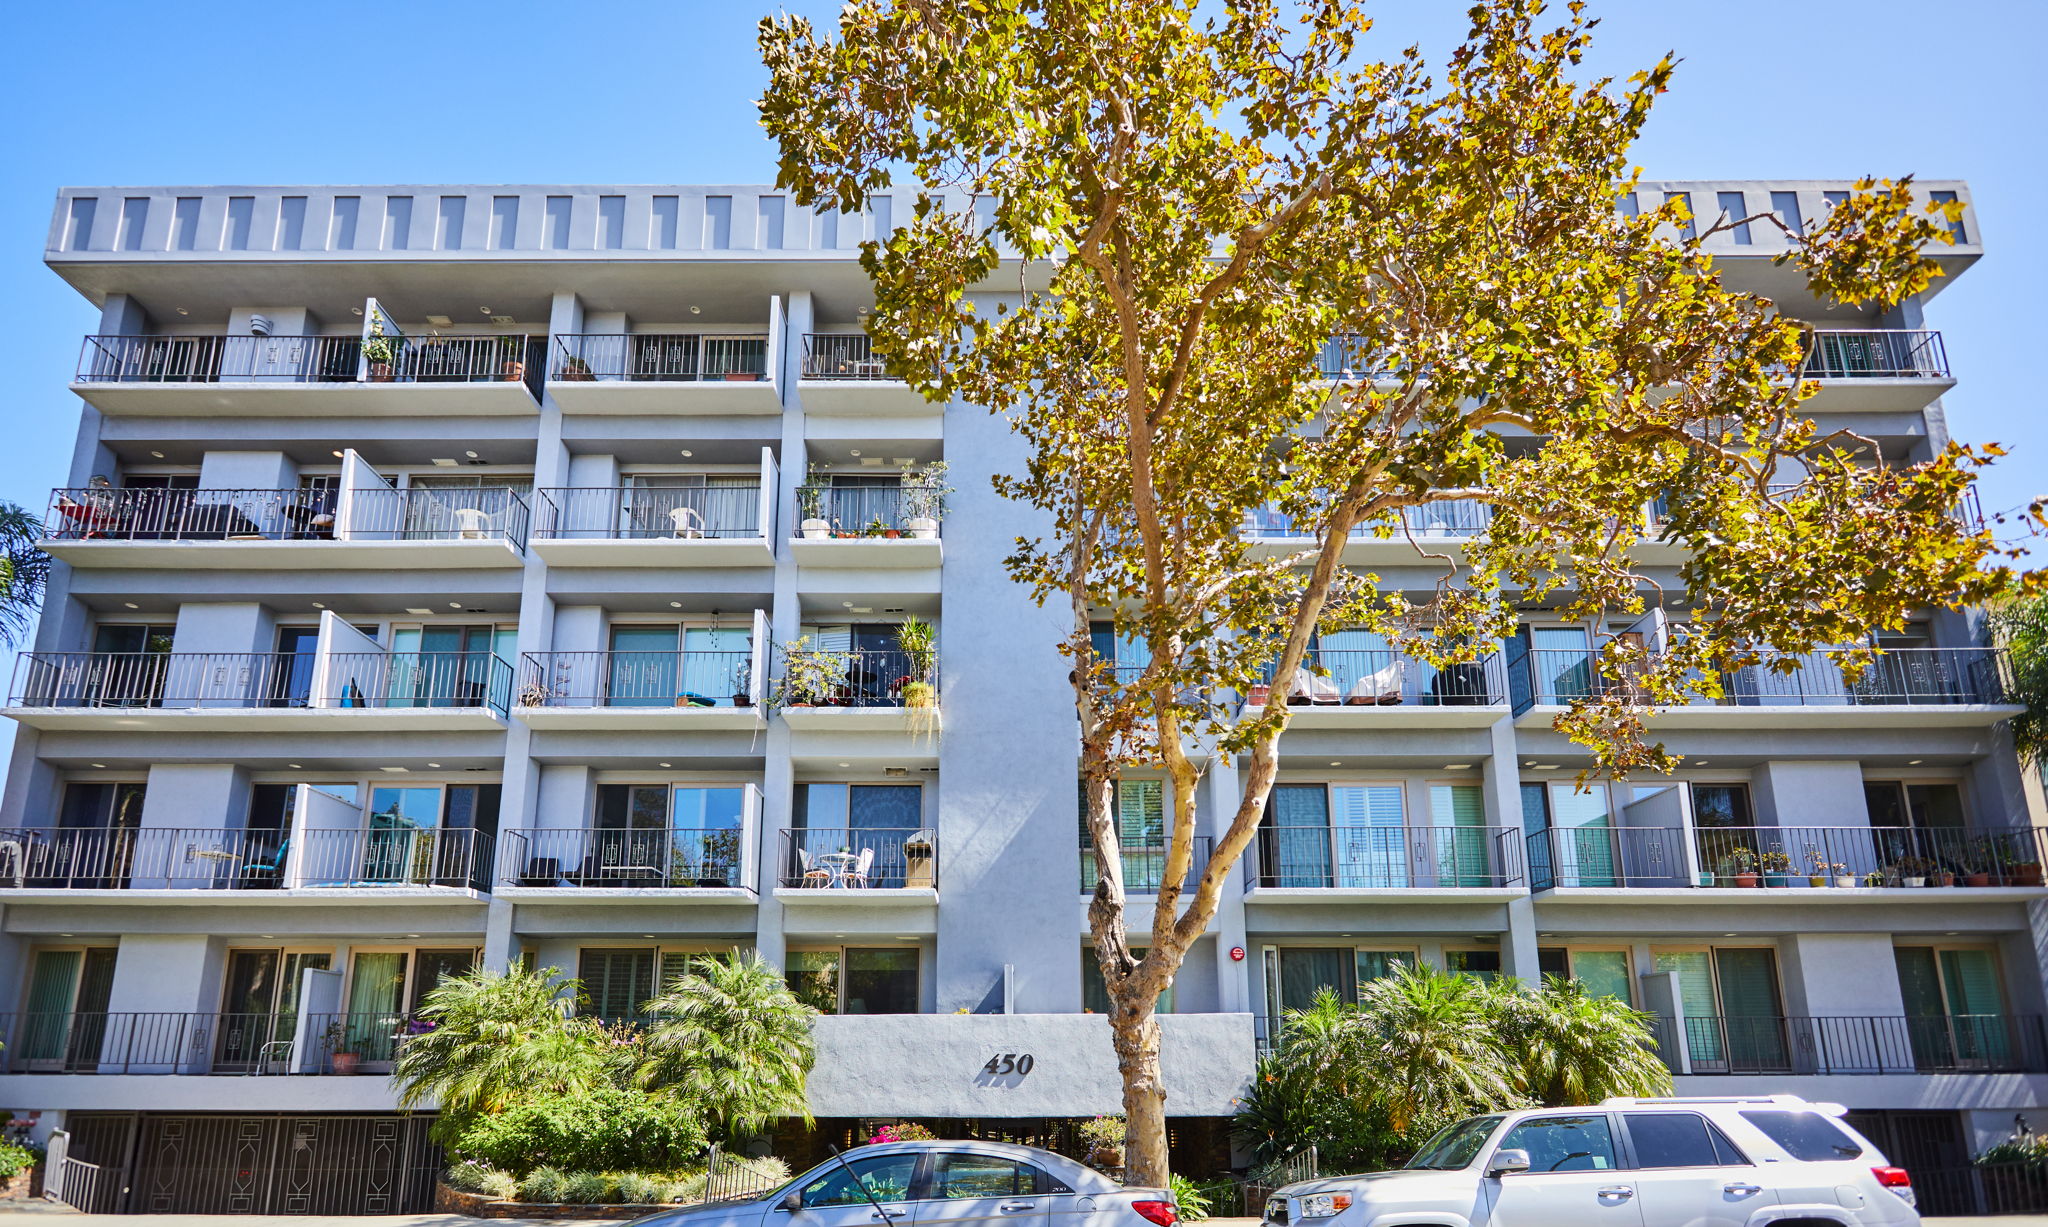  450 South Maple Drive #305, Beverly Hills, CA 90212, US Photo 2